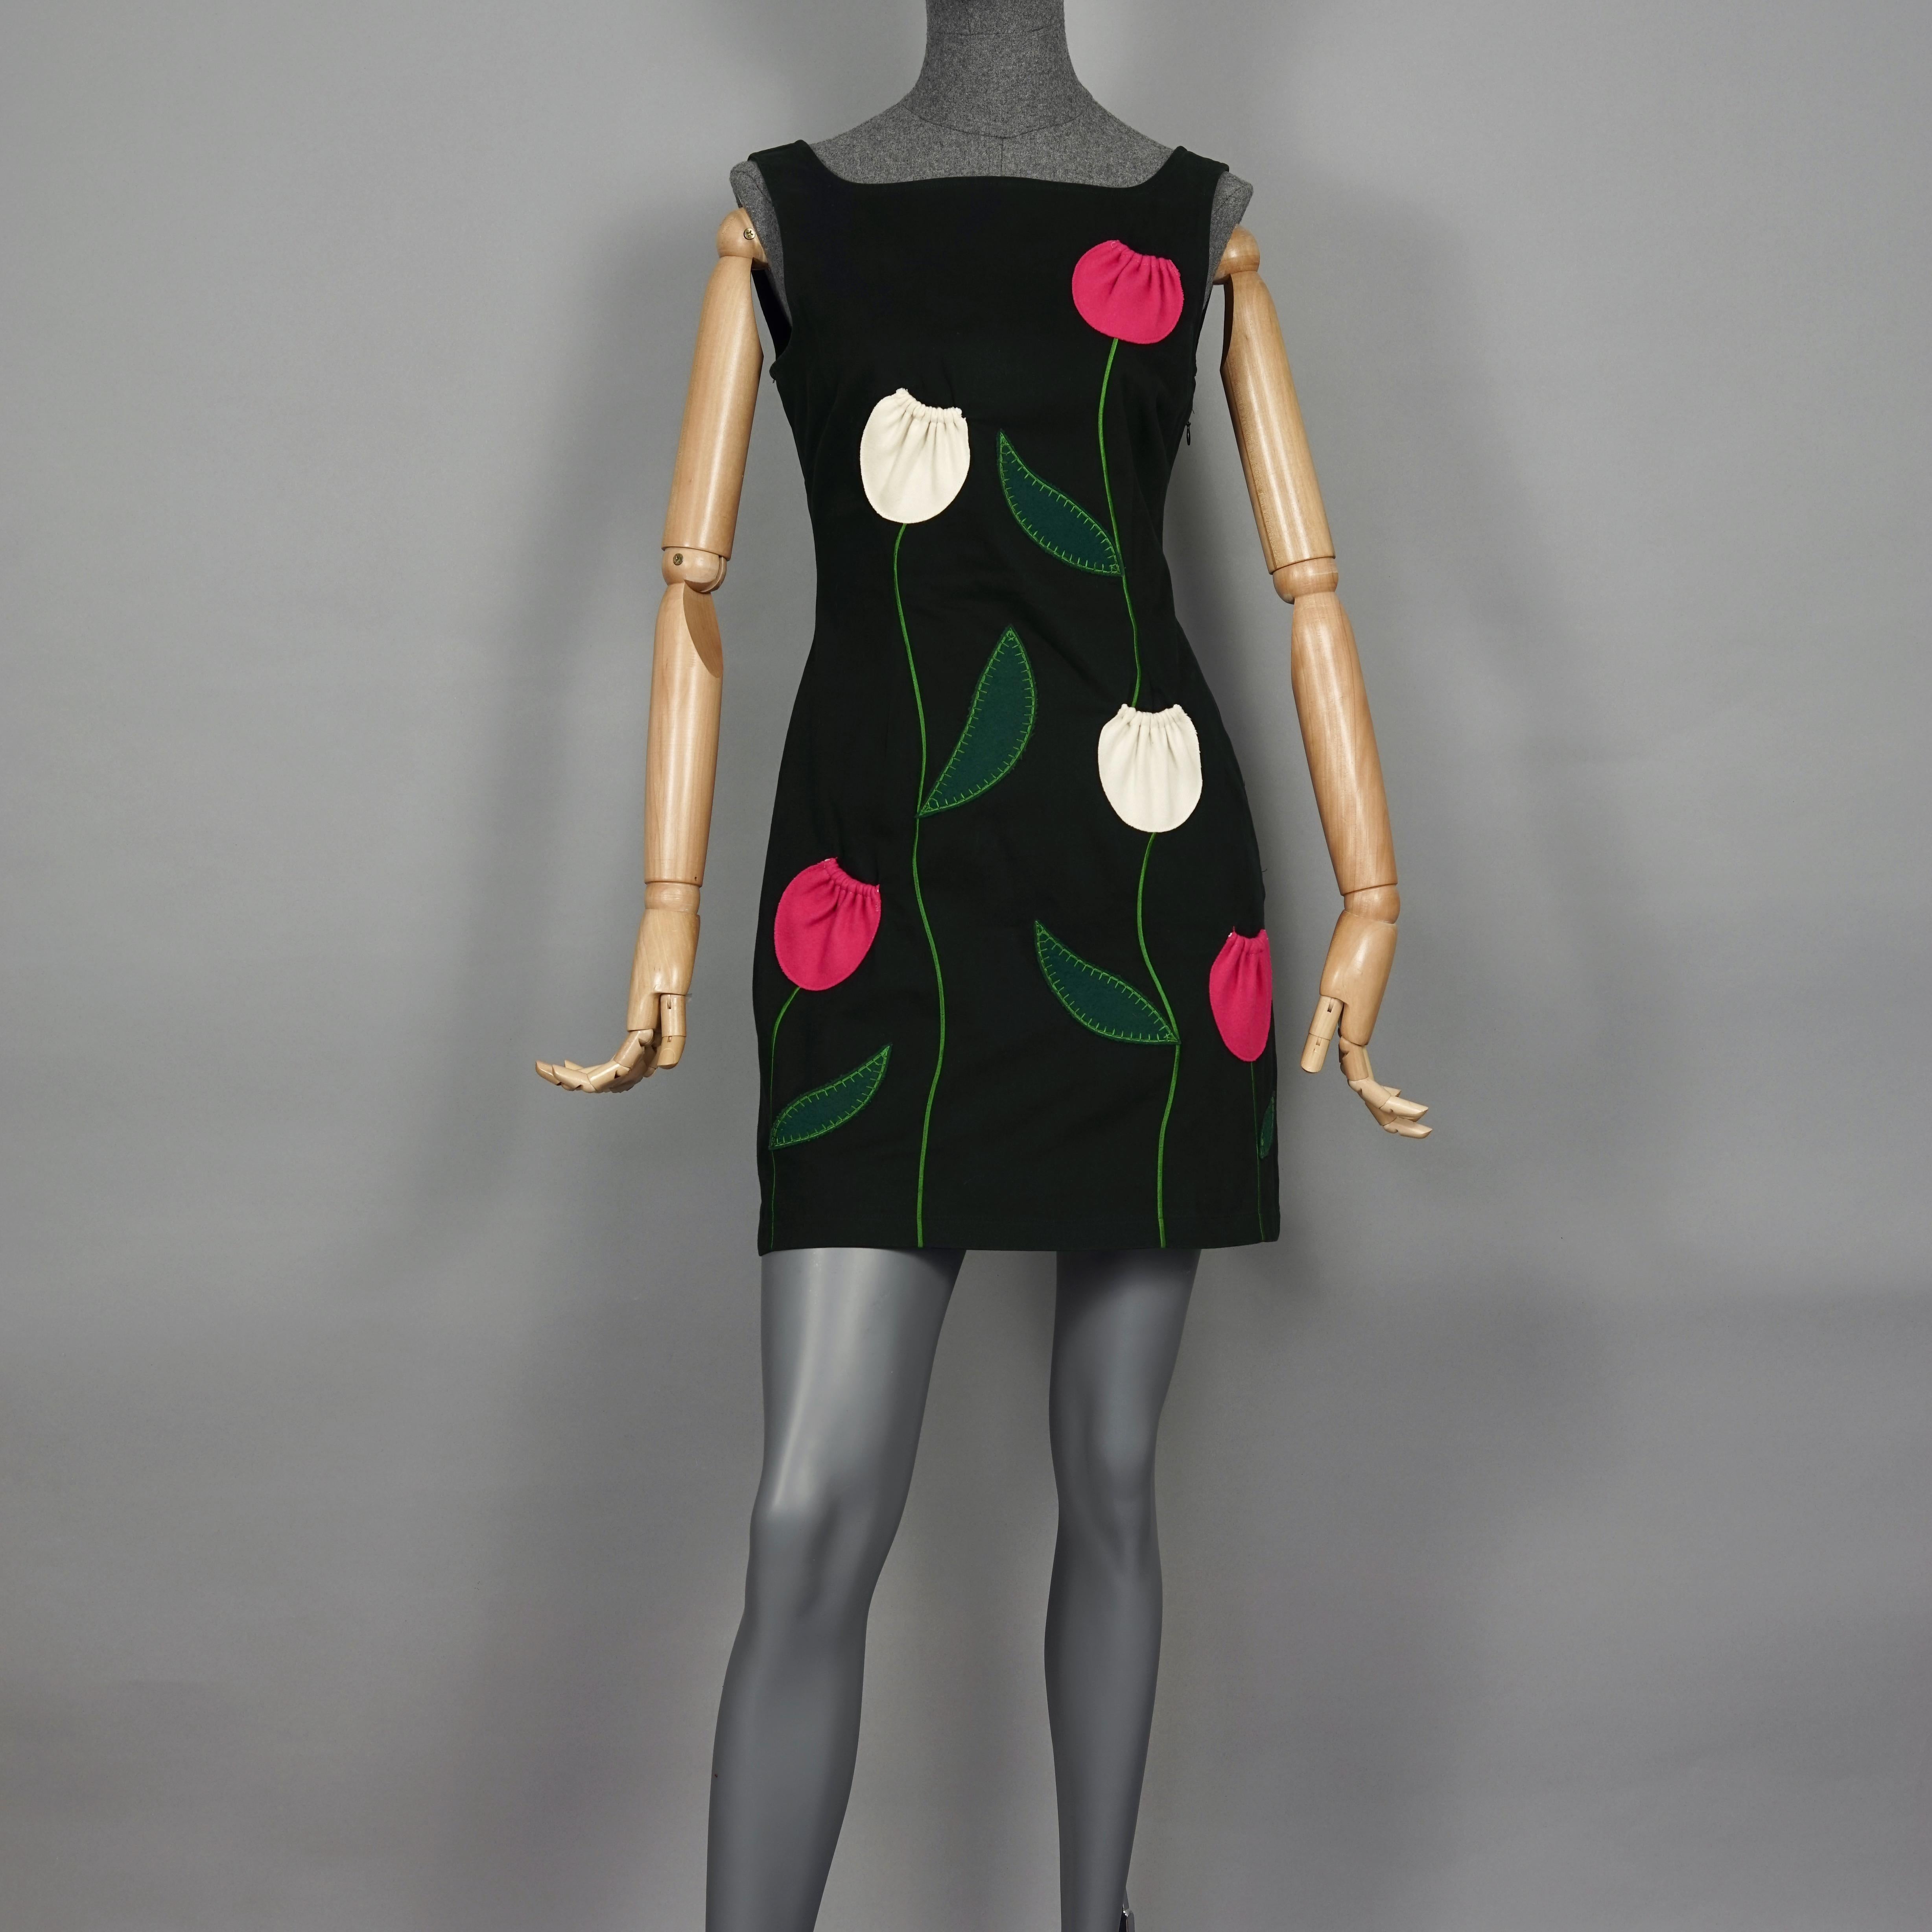 Vintage MOSCHINO Tulip Flower Pockets Novelty Dress

Measurements taken laid flat, please double bust and waist:
Shoulder: 14.96 inches (38 cm)
Bust: 17.32 inches (44 cm)
Waist: 13.78 inches (35 cm)
Hips: 17.71 inches (45 cm)
Length: 33 inches (84